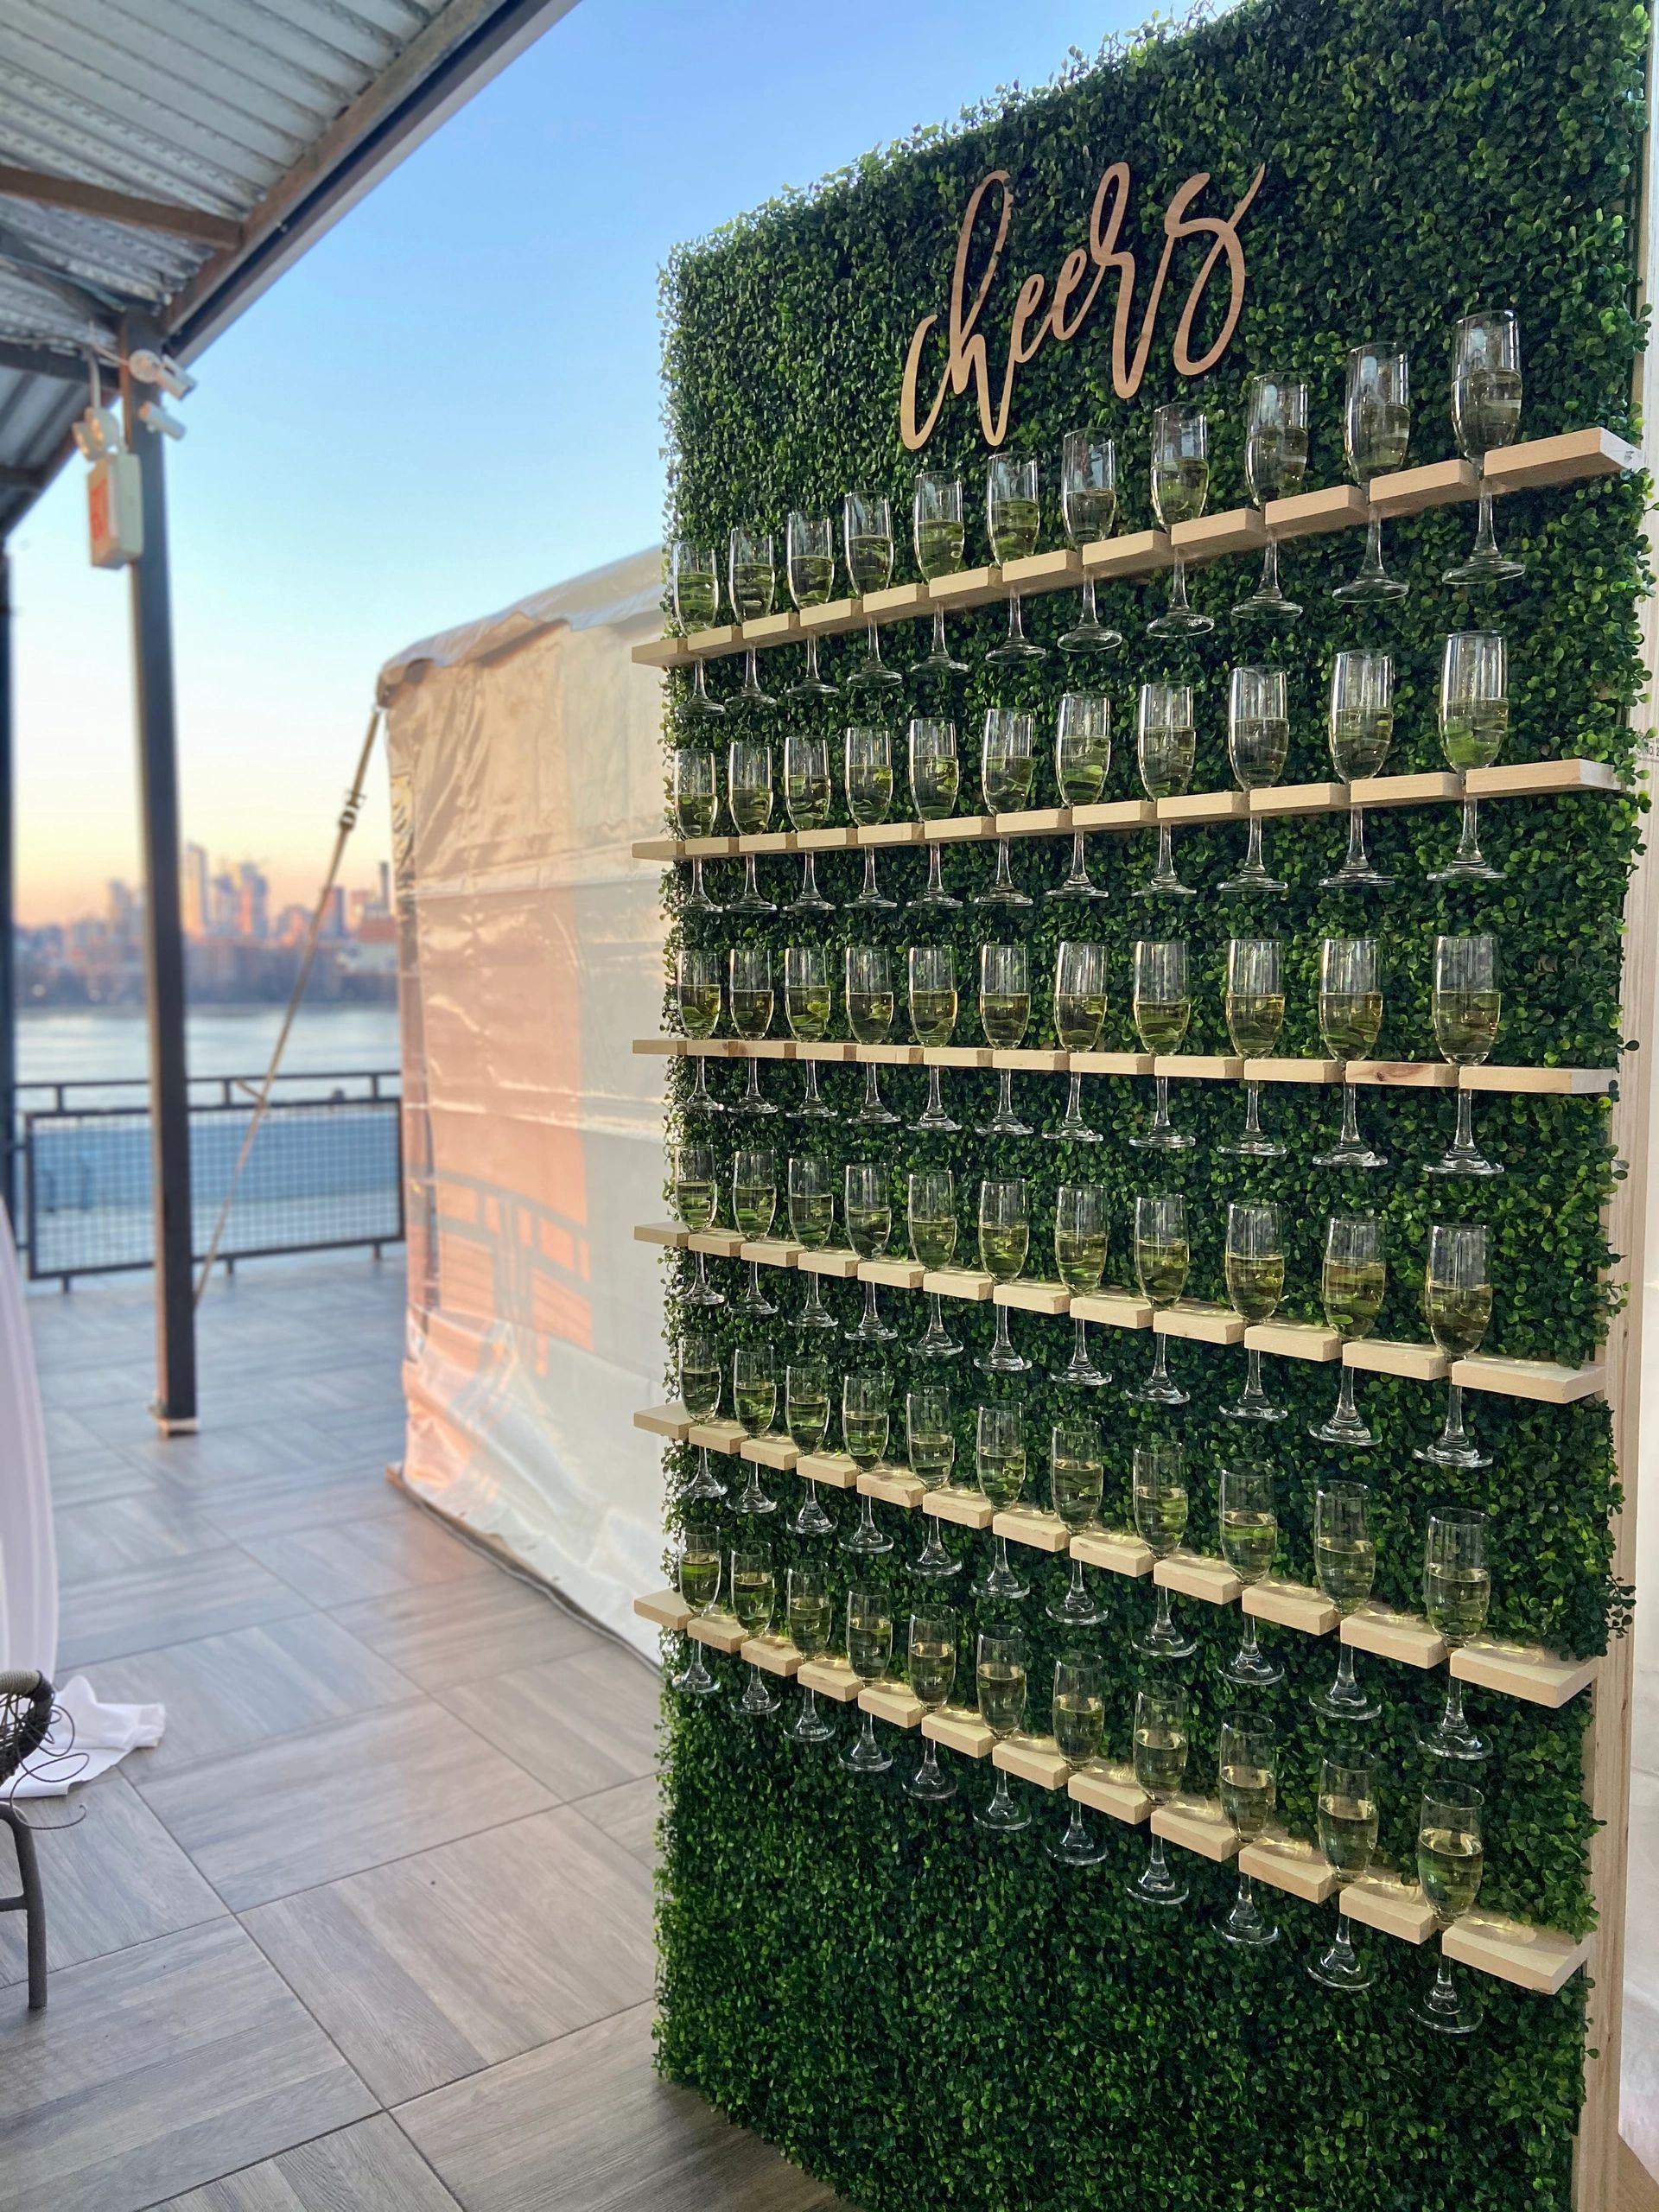 This is a picture of a green champagne wall withe 66 champagne glasses on it in front of the New Yor